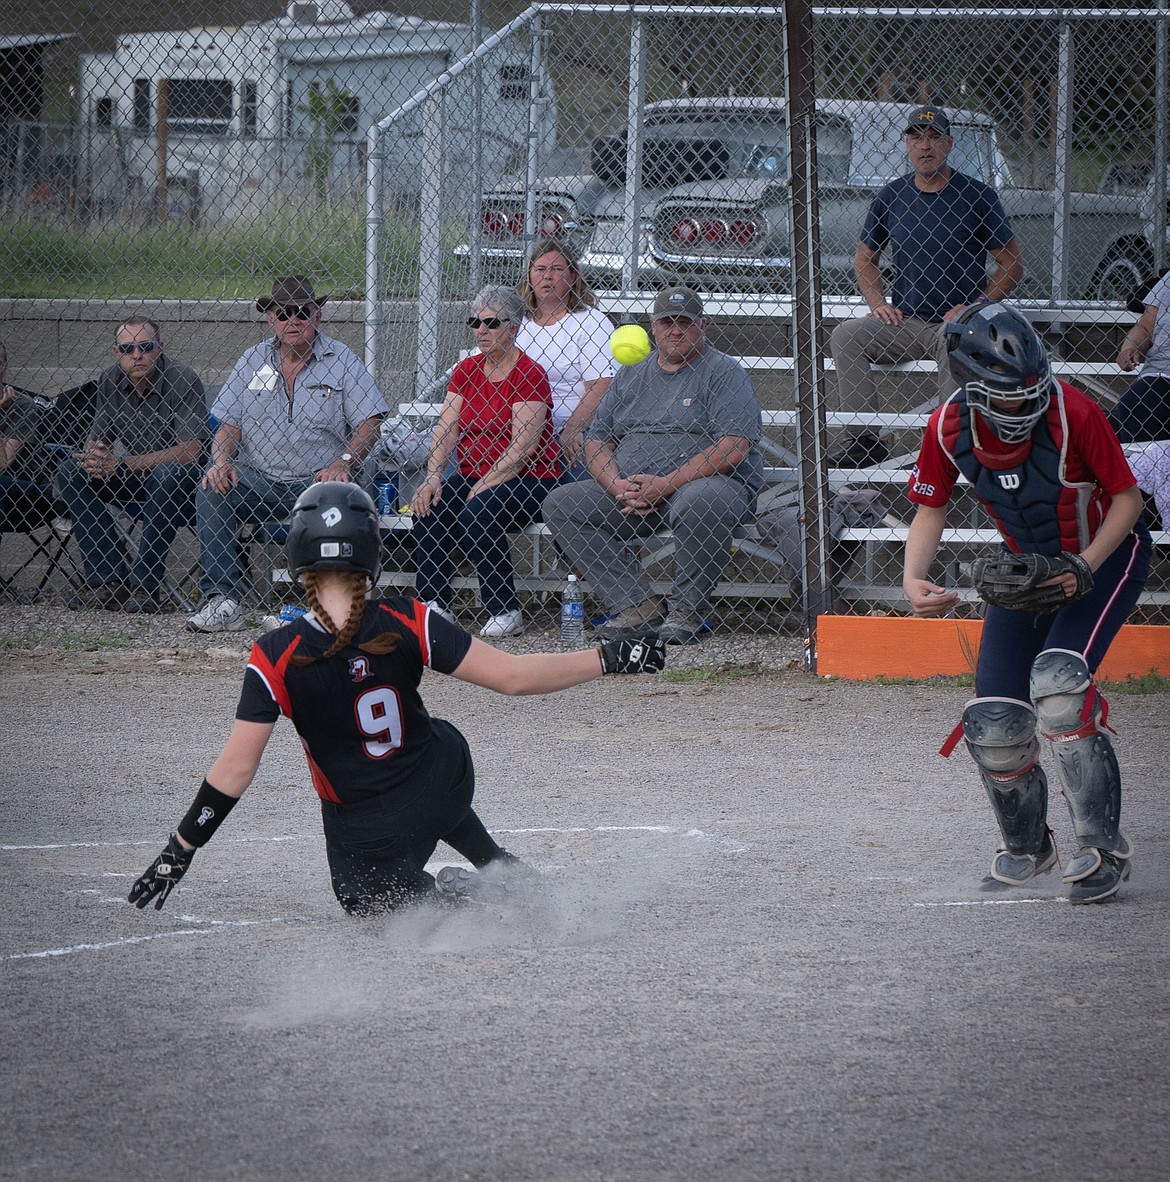 Plains sophomore Aliyah Heathers slides safely into home with one of 13 runs the Trotters scored in their 13-11 win over Troy this past Thursday in Plains. (Tracy Scott/Valley Press)